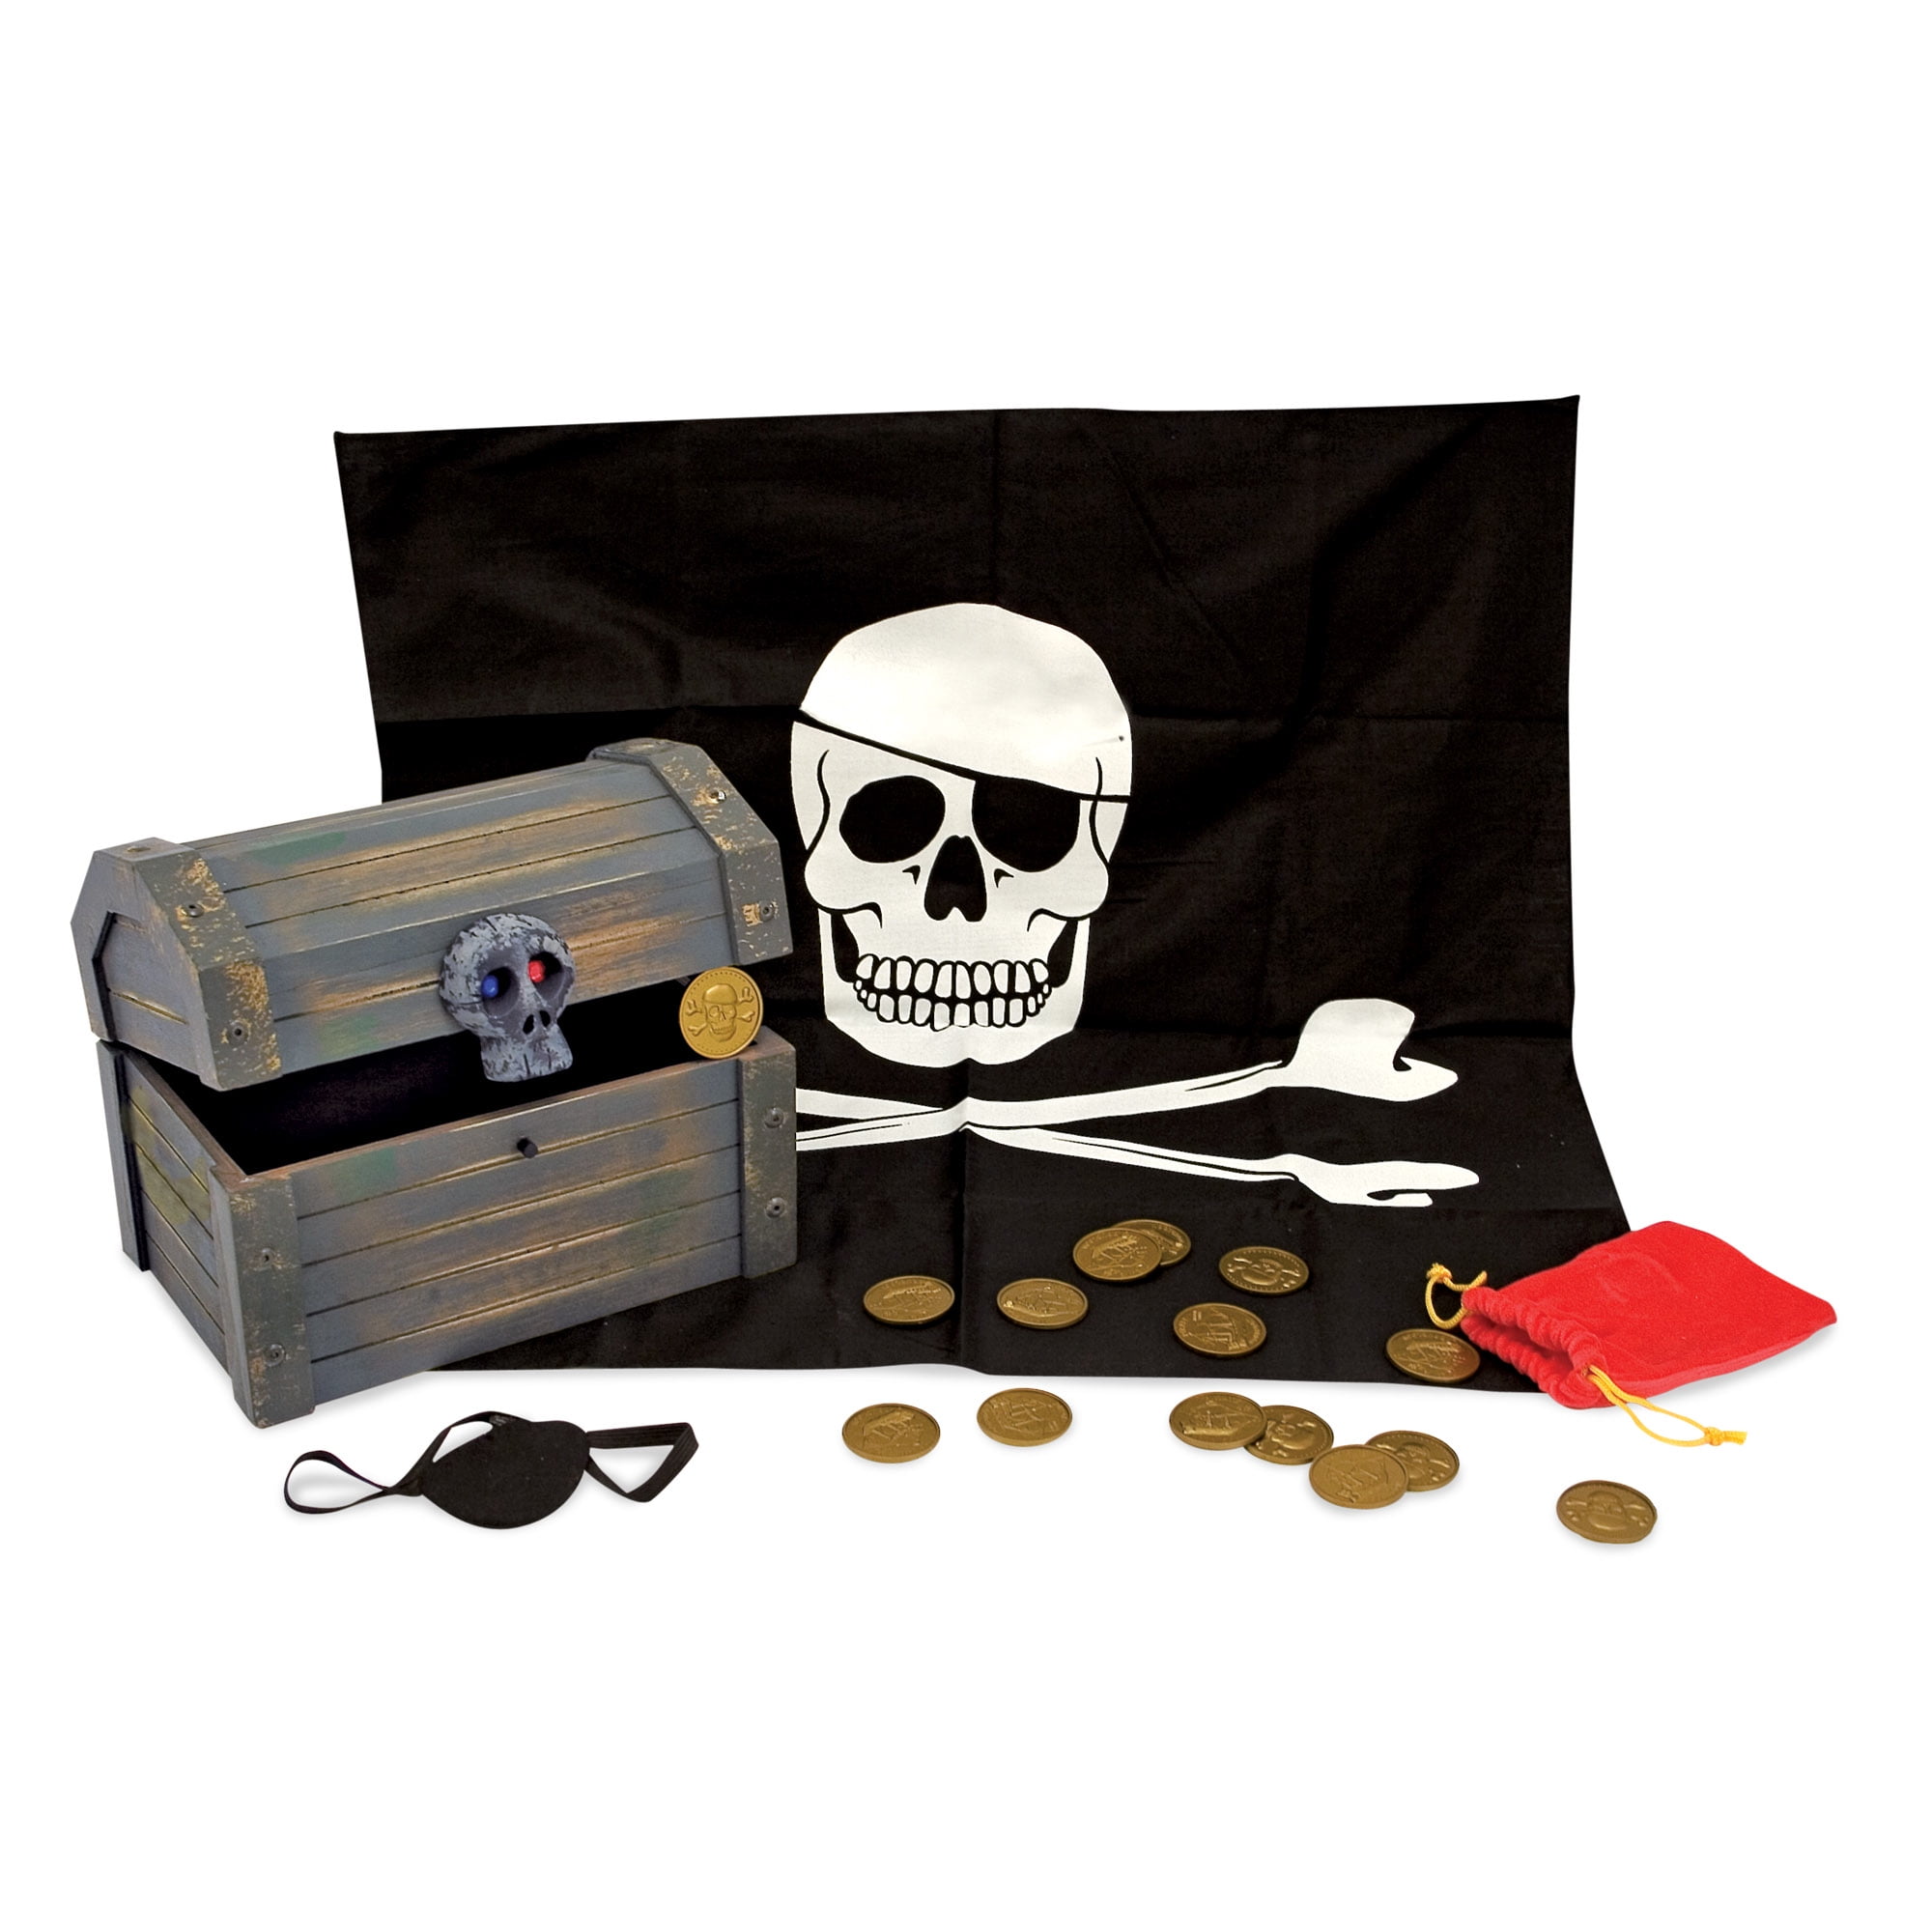 Treasure Chest 11"x 7"x 6" Lock Skeleton Keys Doubloon Accents in Antique 